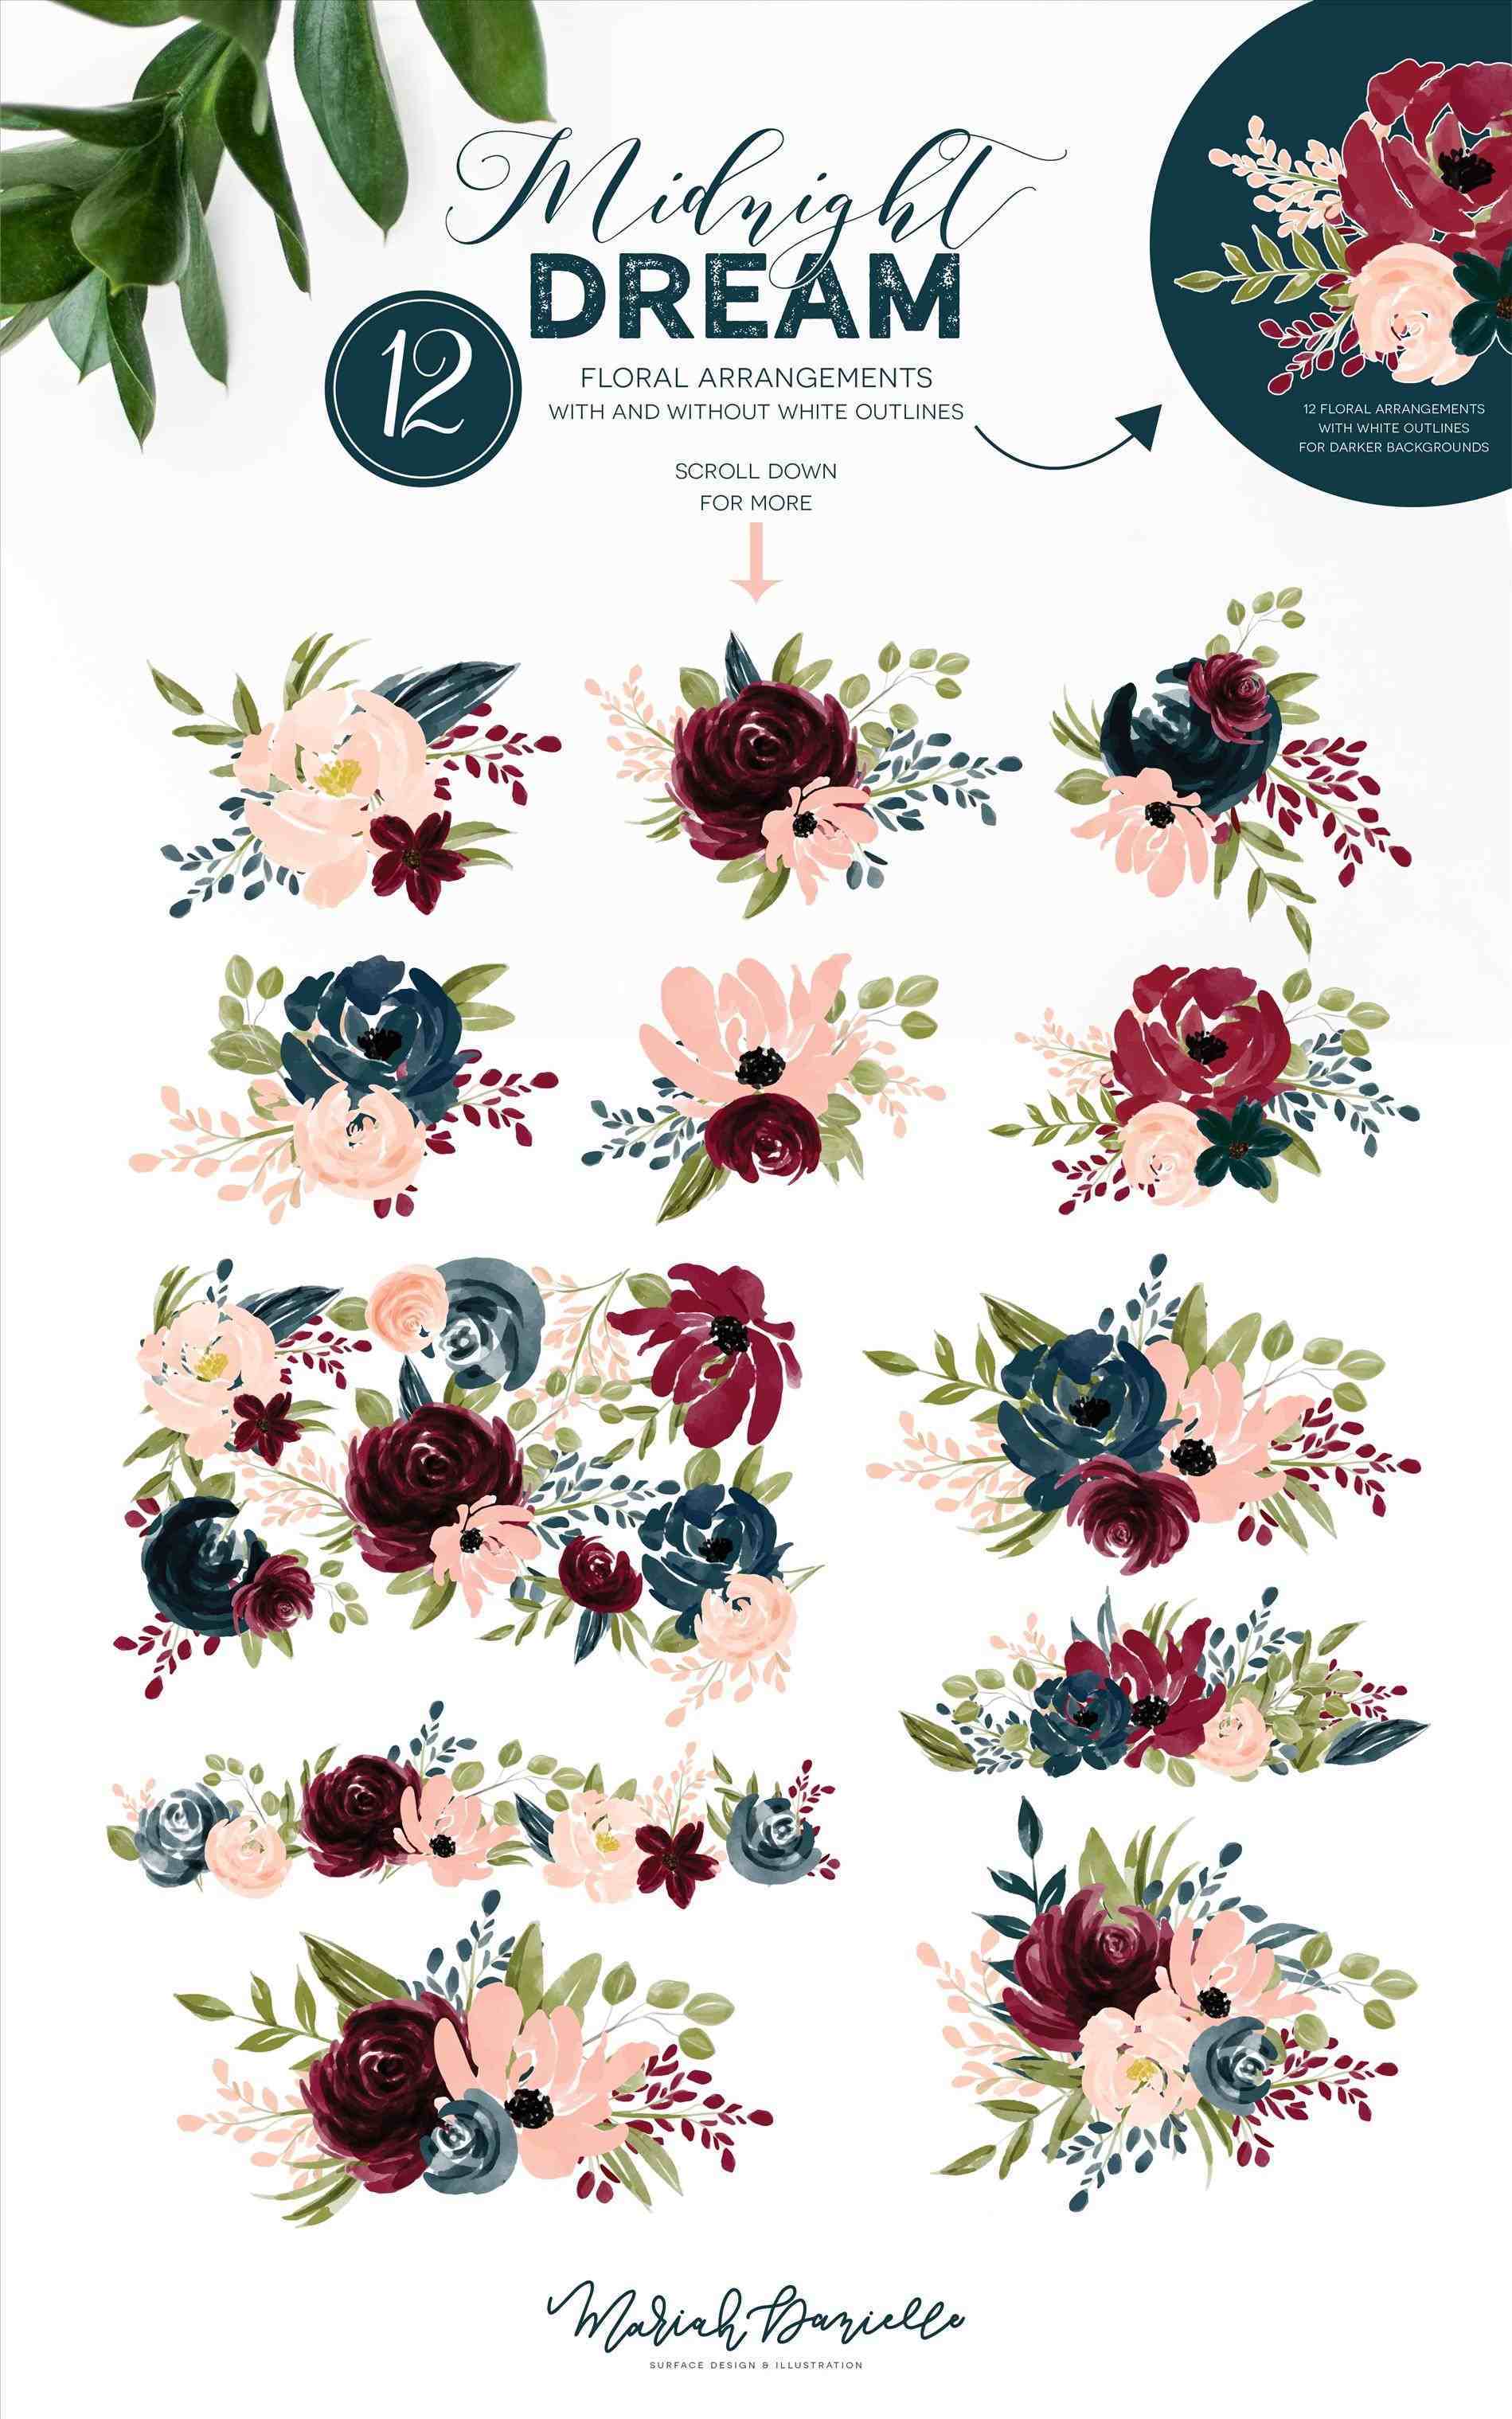 Rustic Flower Logo - Graphic Wreath Clip Art U Vector Images Oh So Nifty Vintage ...